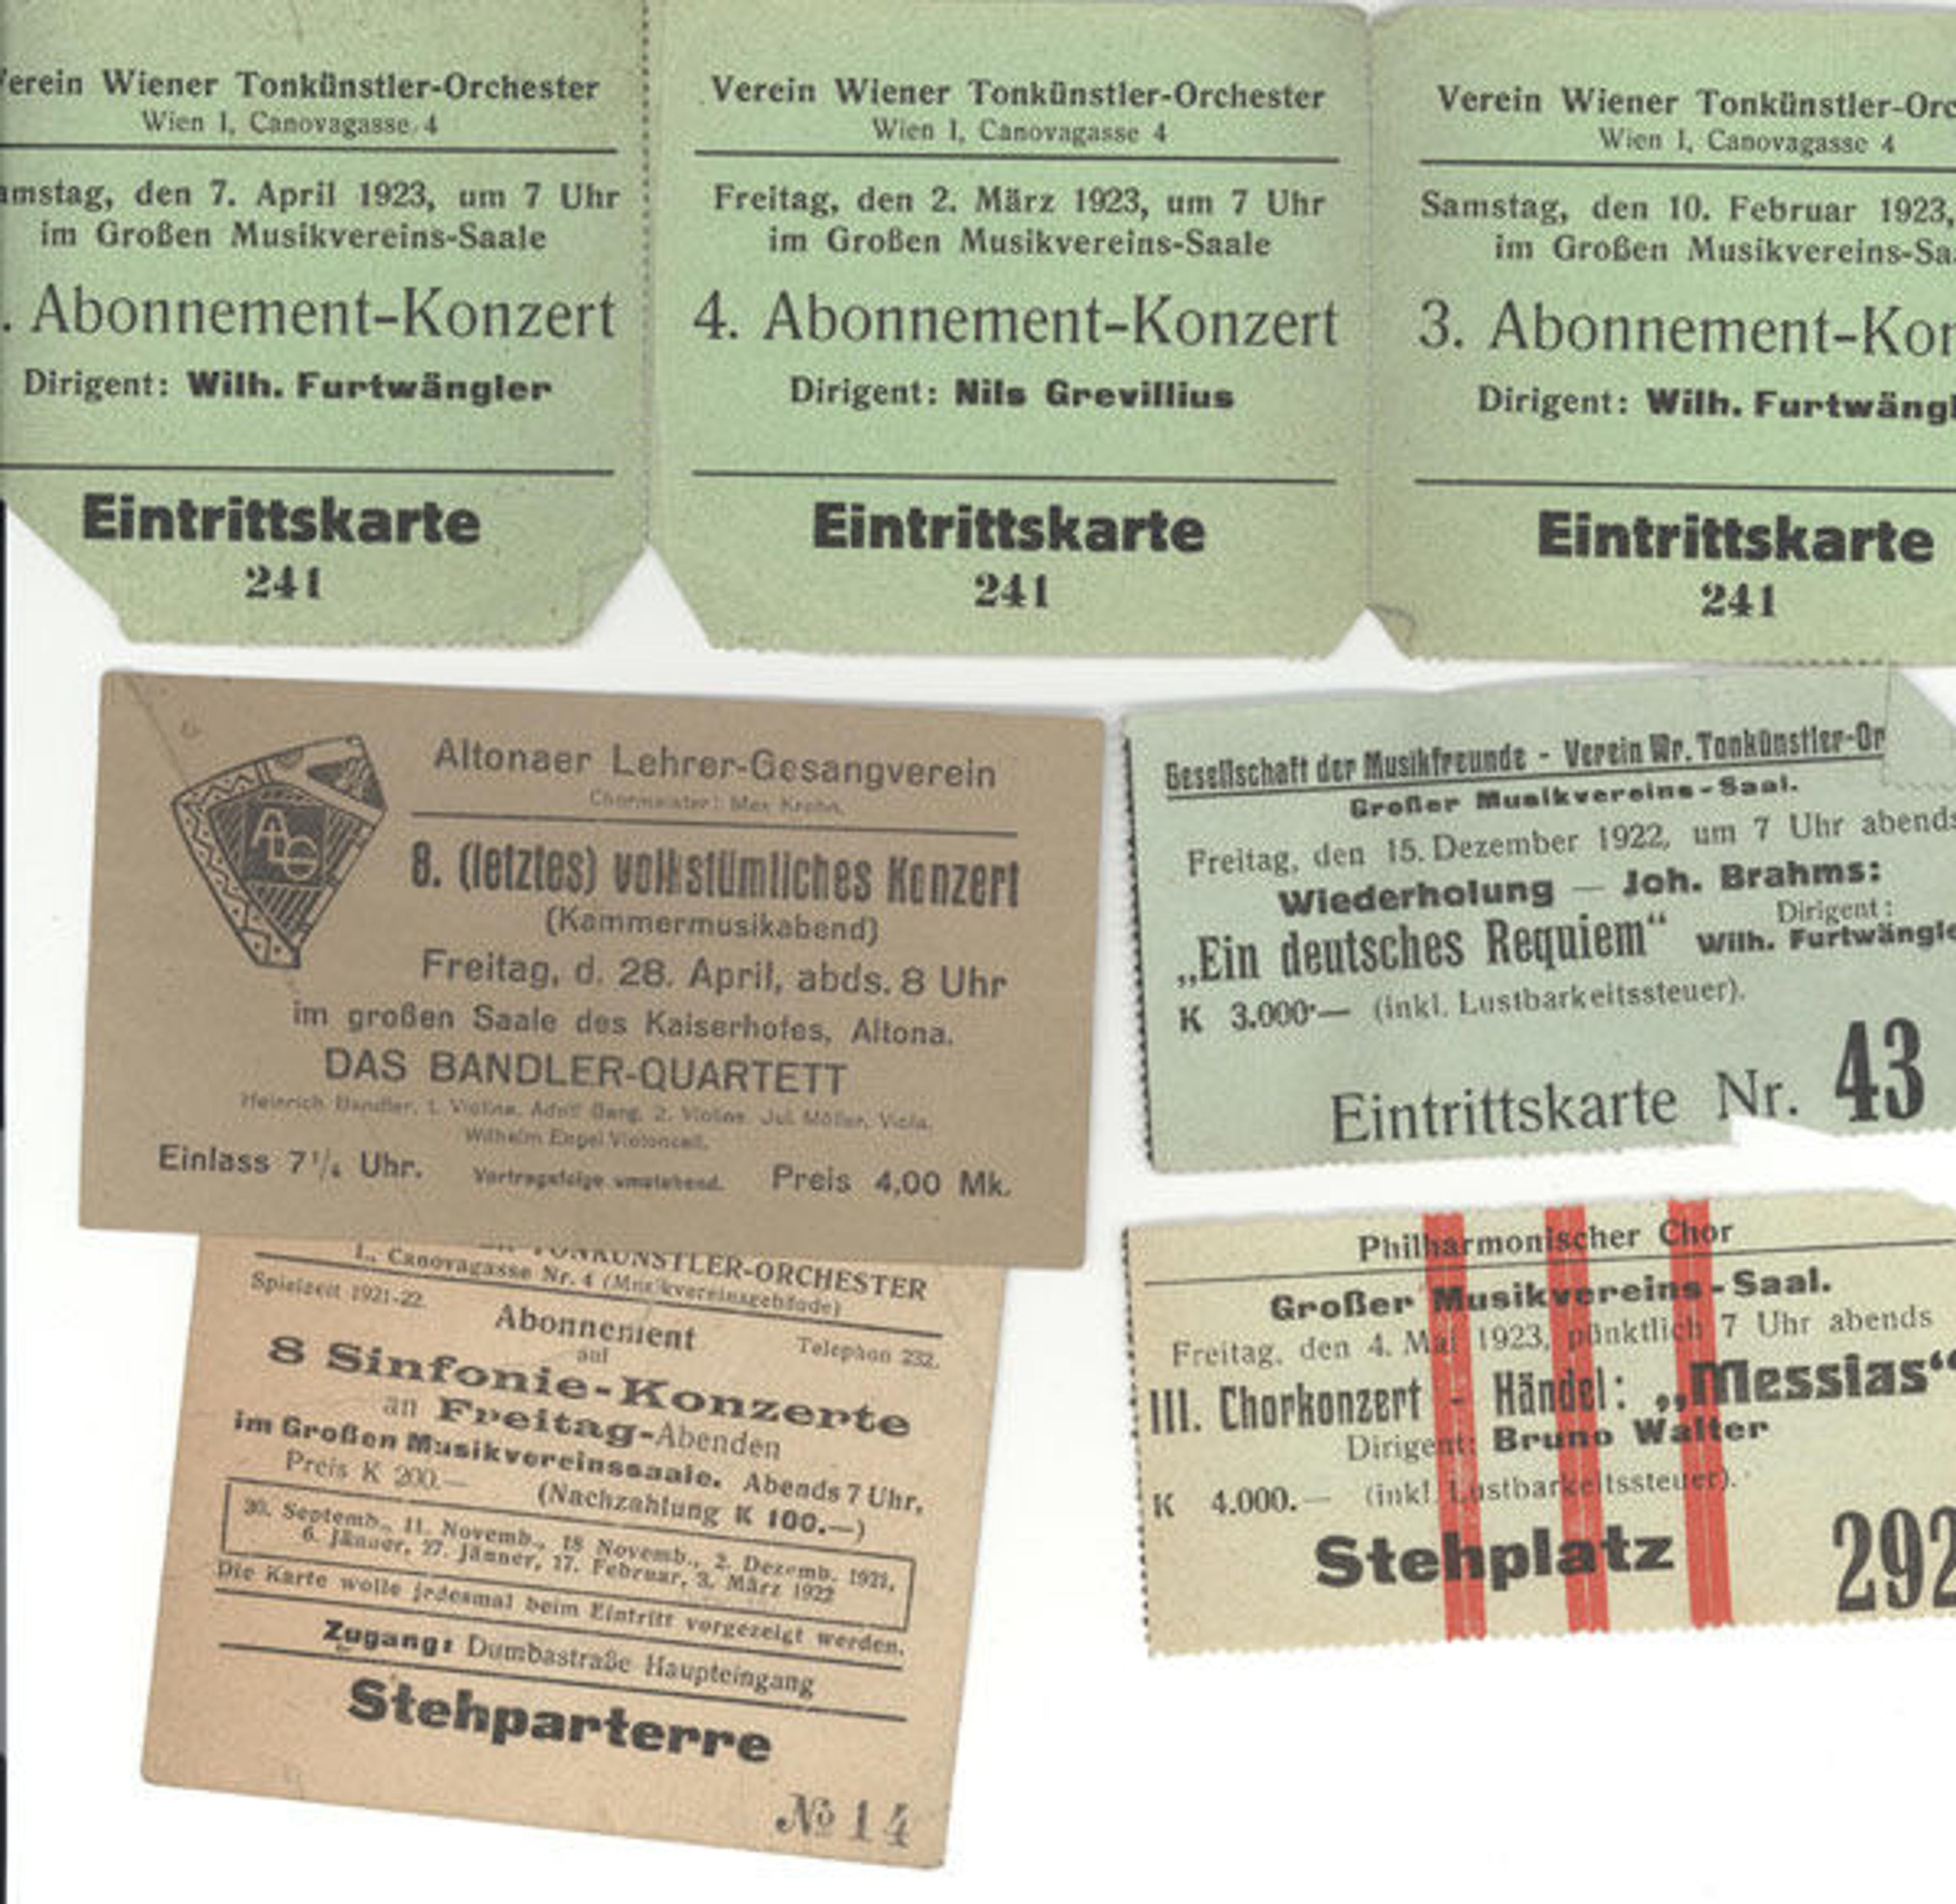 A selection of Winternitz's concert tickets from his time in Vienna, and the envelope where he kept them